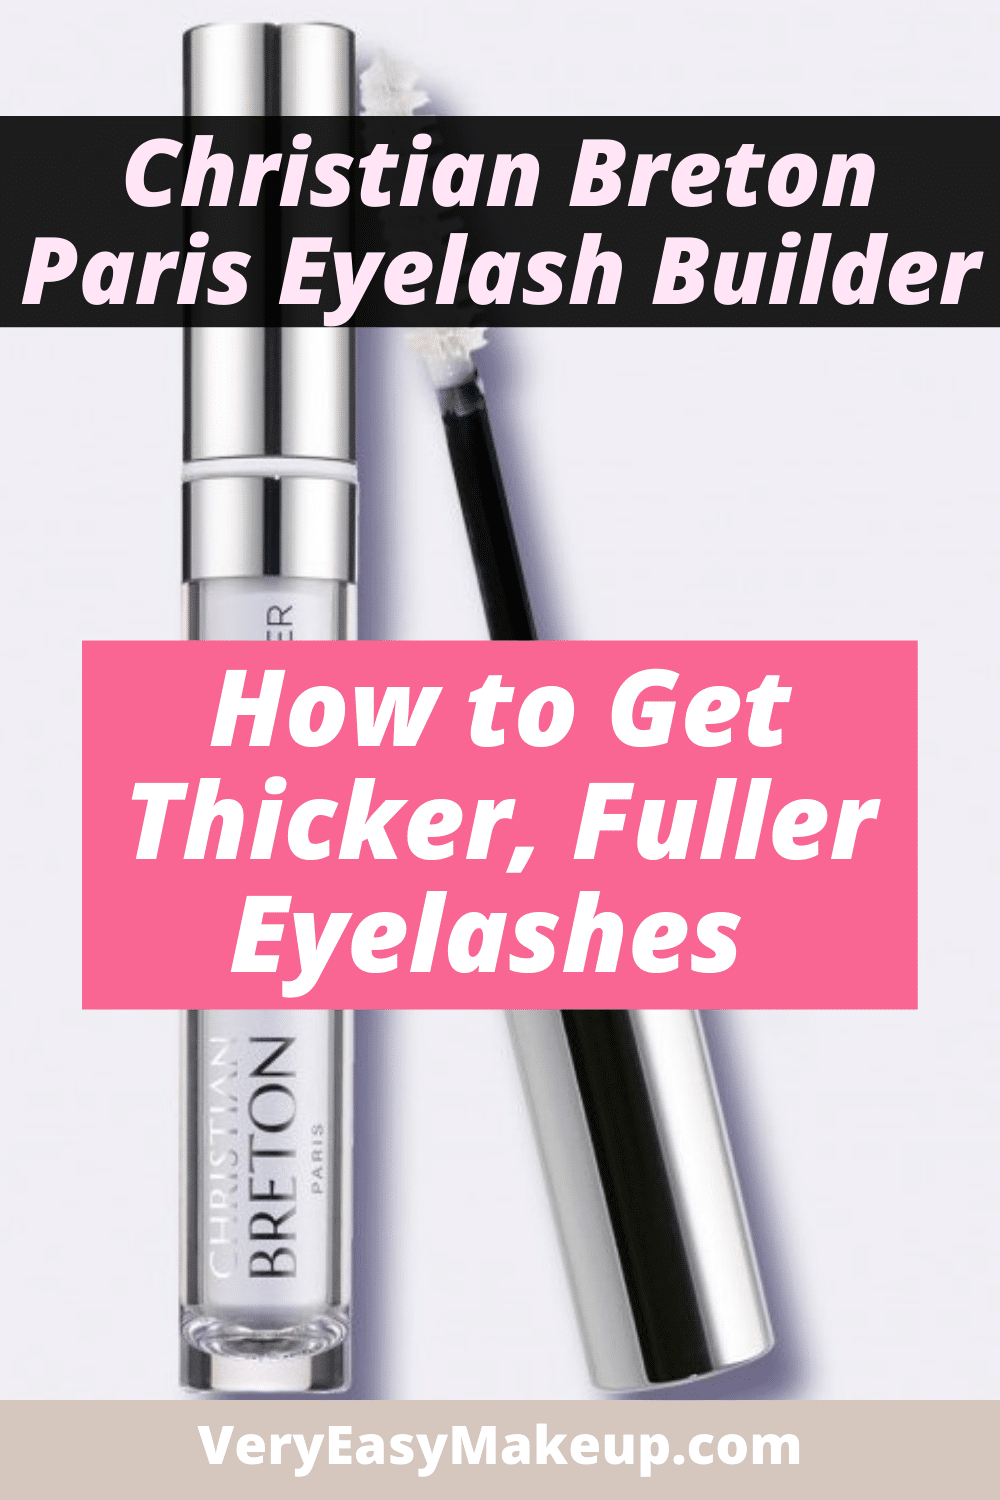 Christian Breton Eyelash Builder and How to Get Thicker, Fuller Eyelashes by Very Easy Makeup